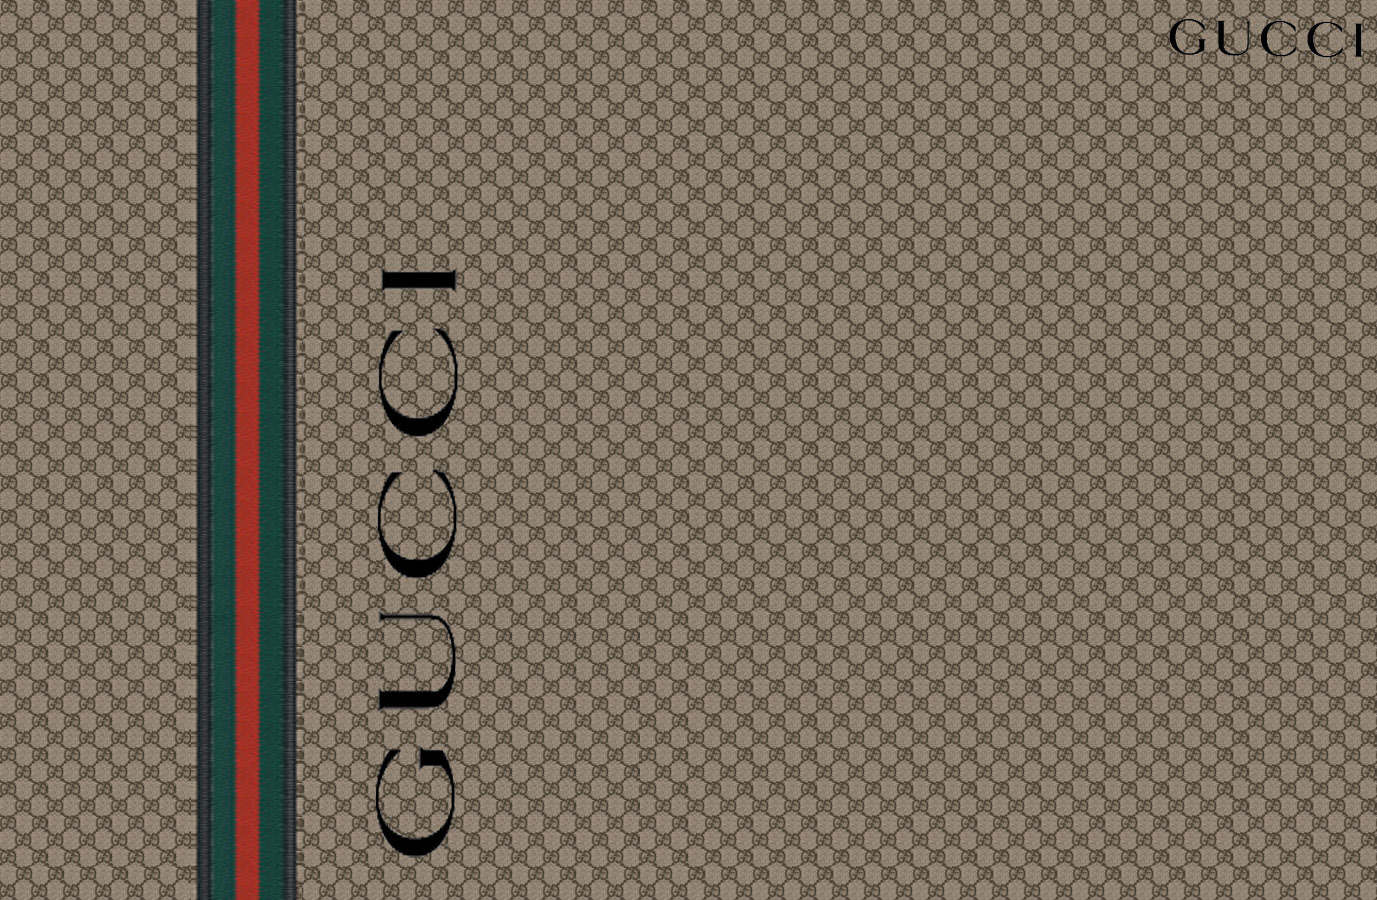 Gucci Wallpaper For iPhone Pizzot